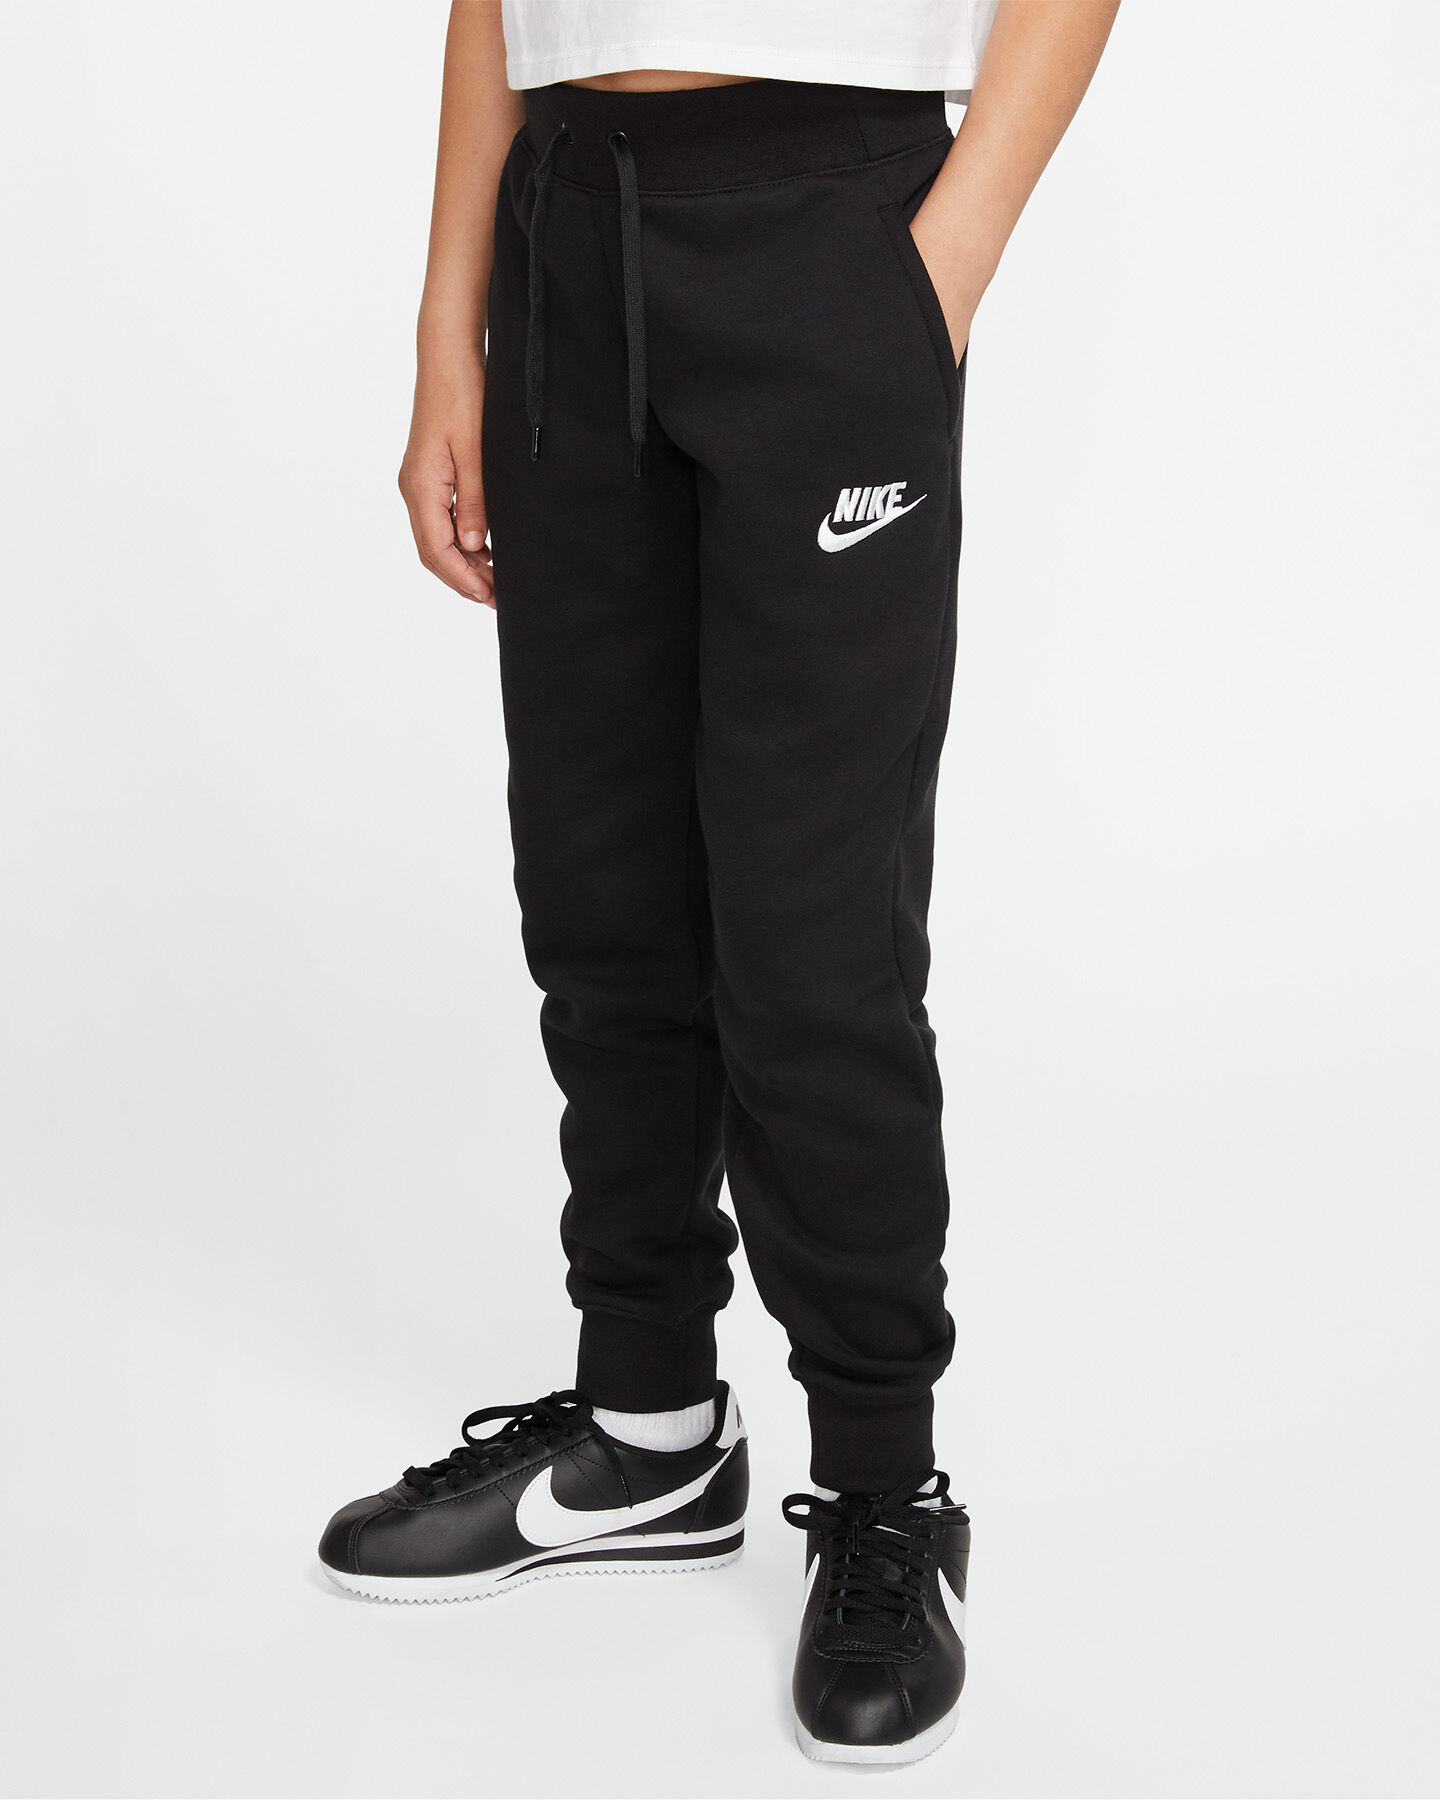  Pantalone NIKE YOUNG ATHLETES JR S5073085|010|S scatto 2